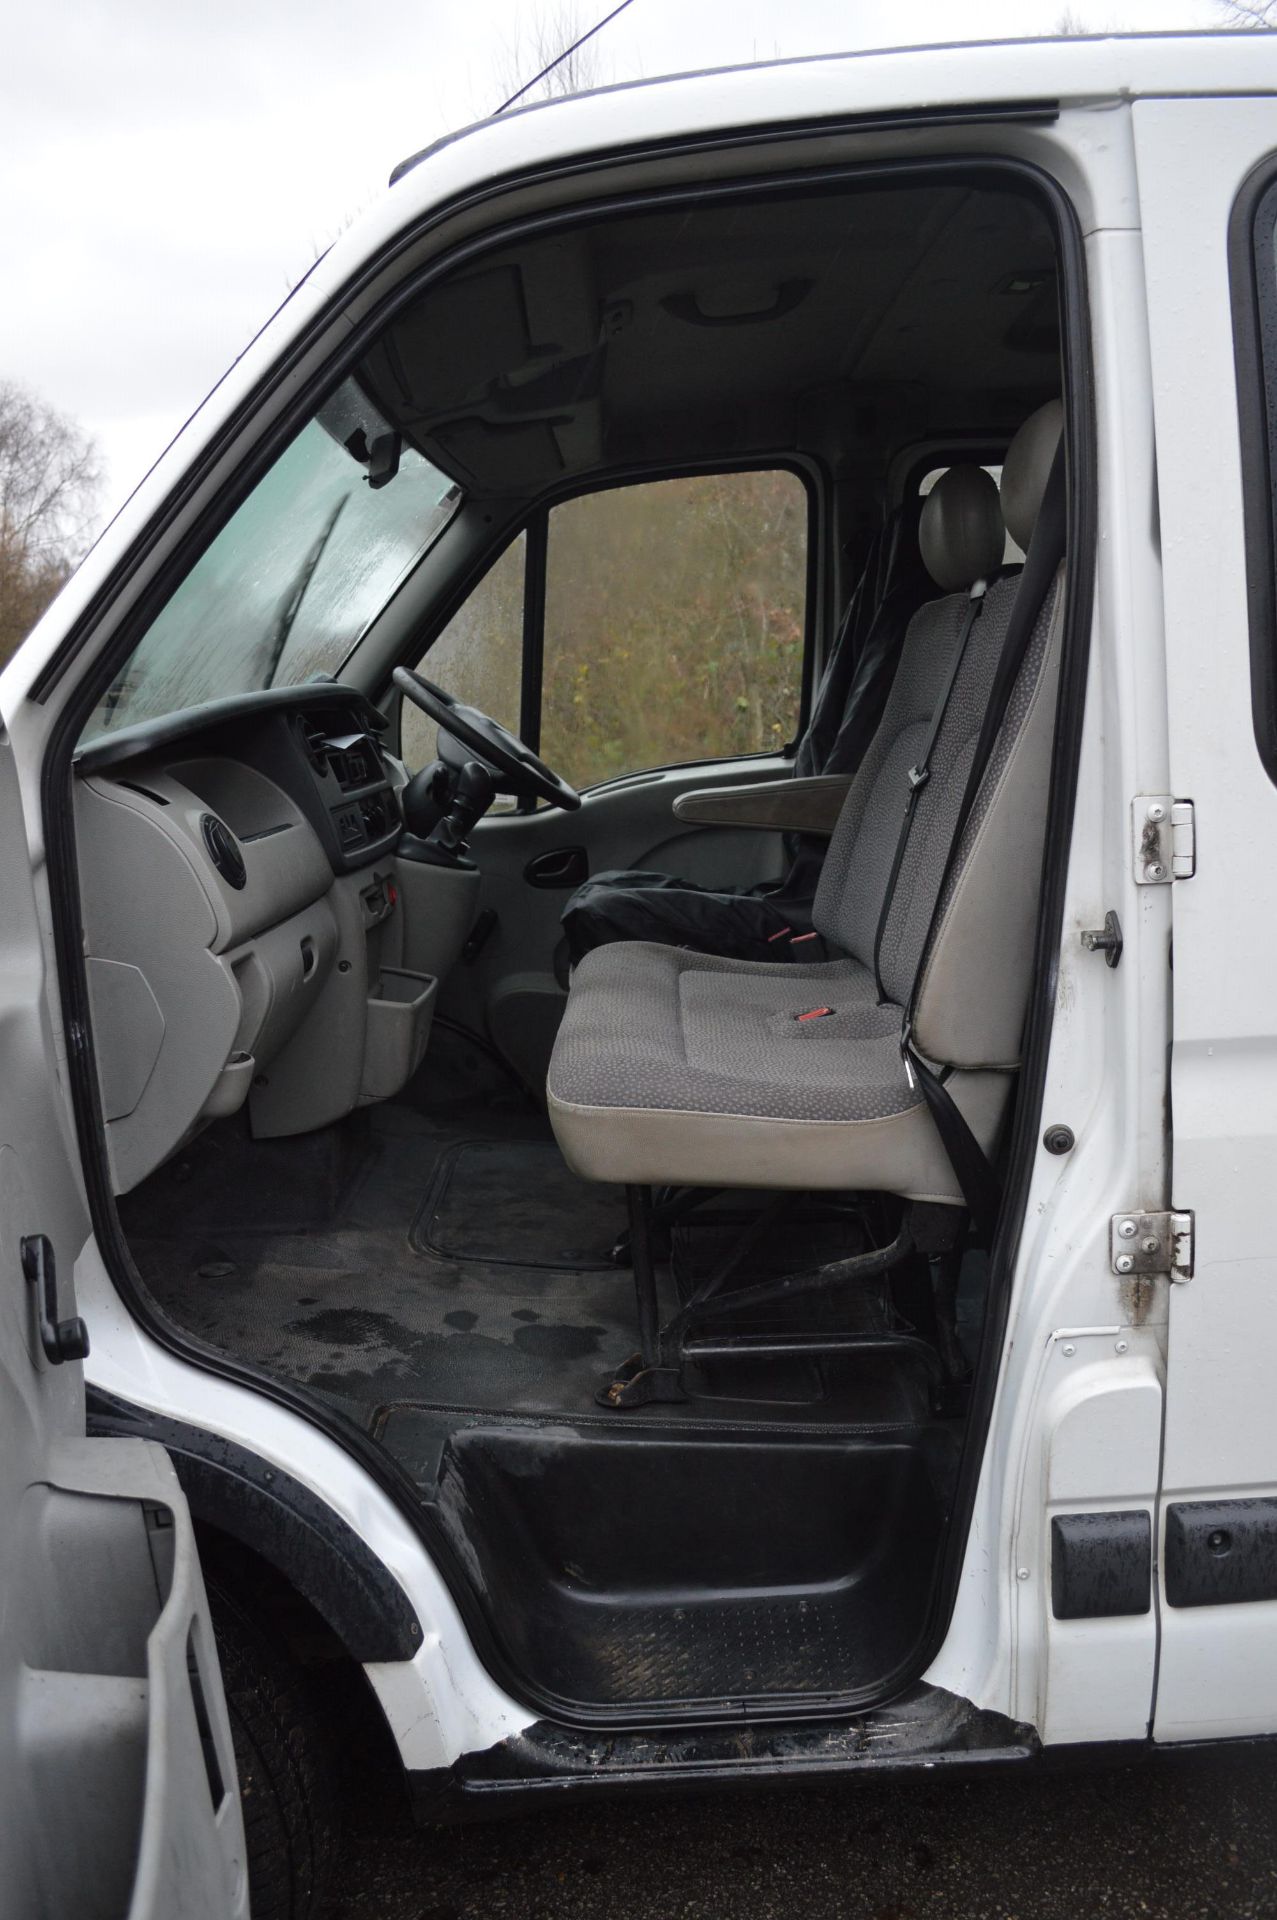 2009/59 REG VAUXHALL MOVANO 3500 CDTI LWB DOUBLE CAB TIPPER, SHOWING 2 FORMER KEEPERS *NO VAT* - Image 10 of 18